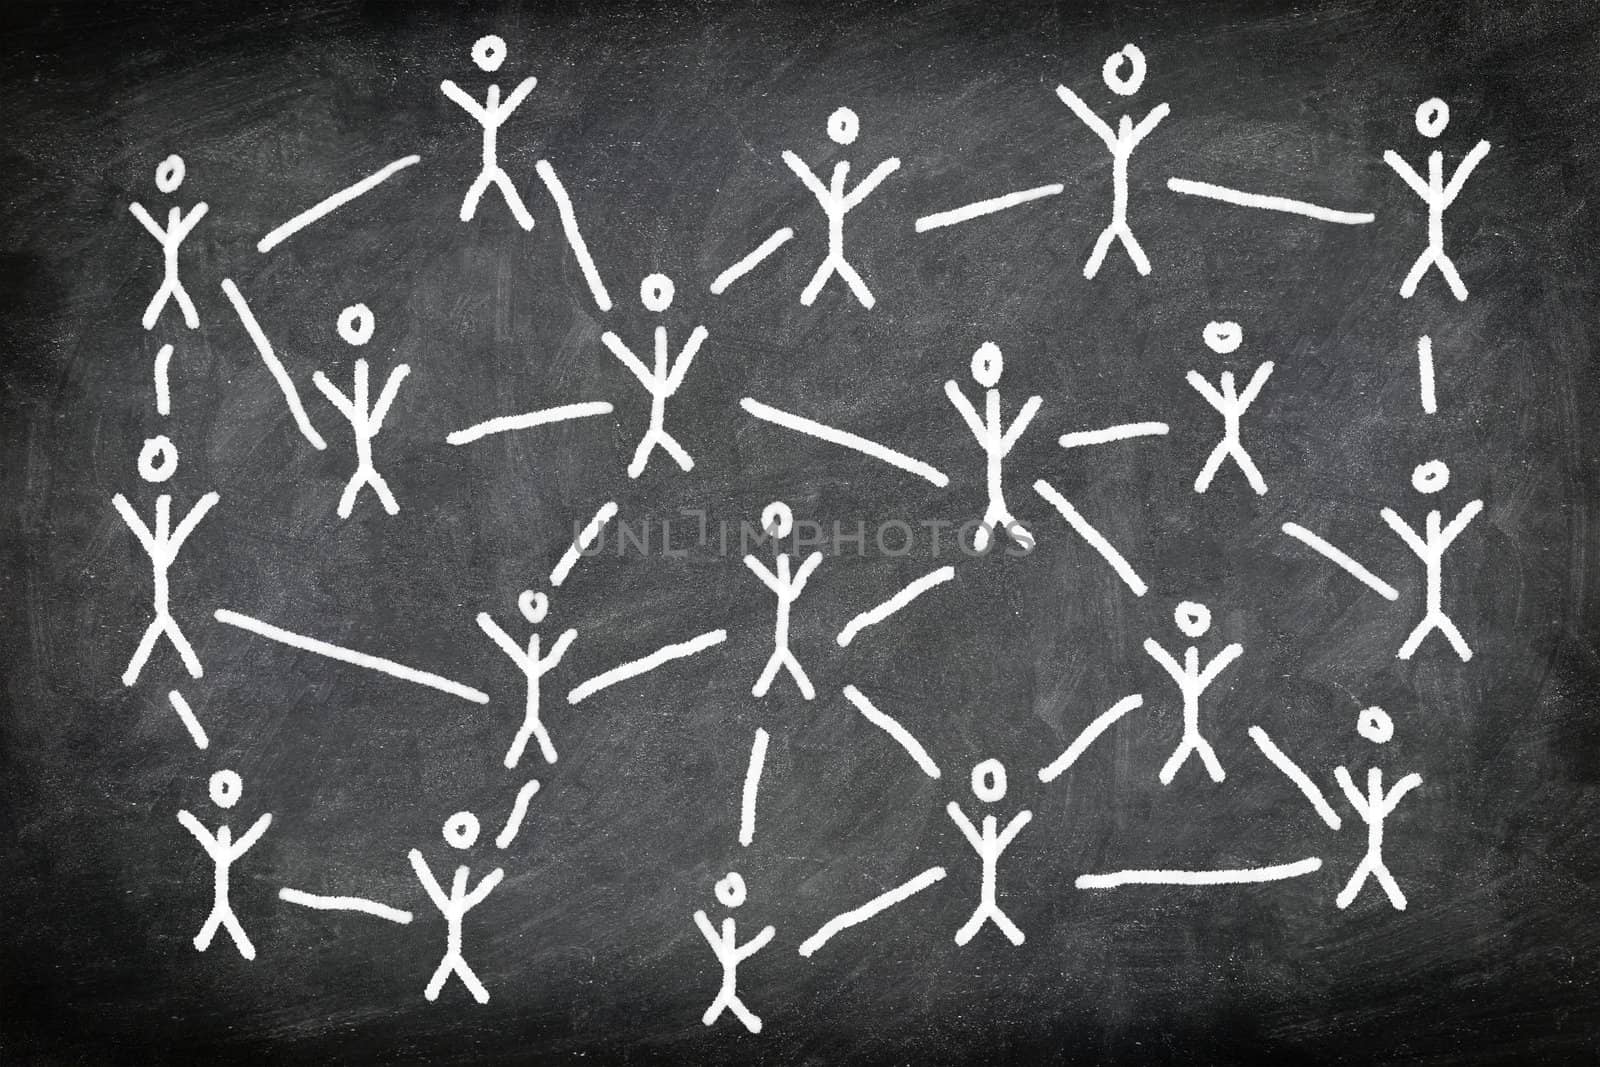 Social media network. Networking concept photo of blackboard / chalkboard chalk drawing of people or business connections